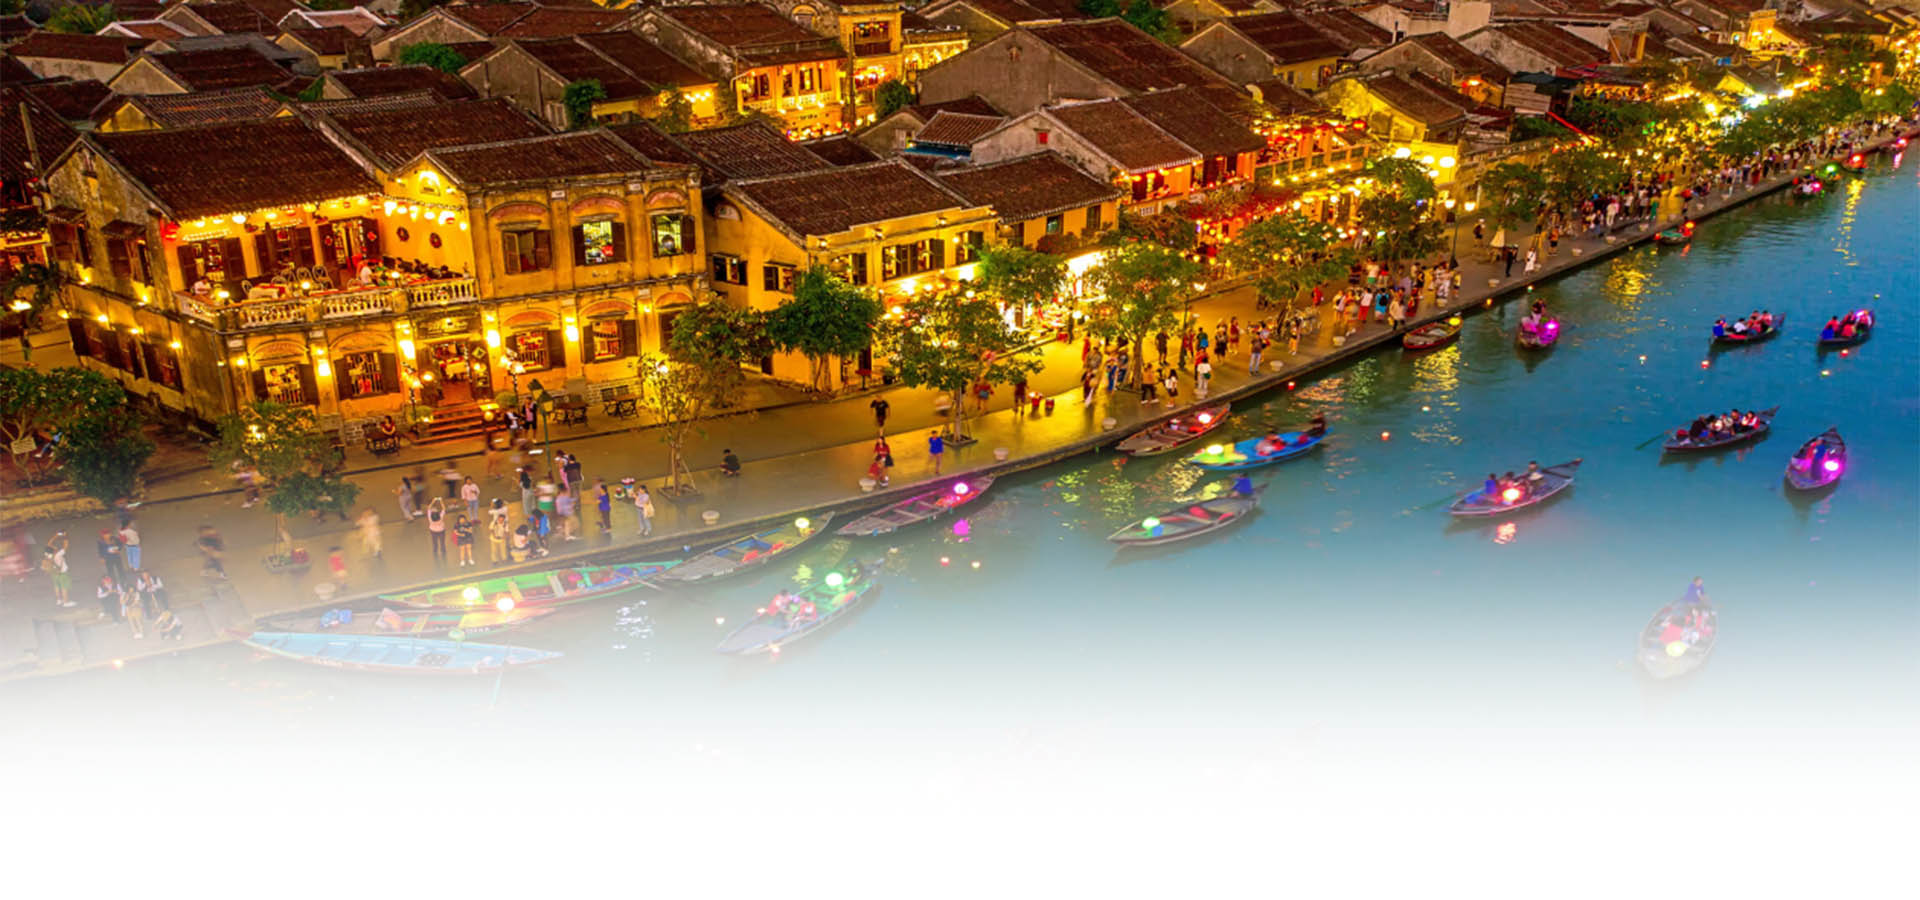 Vietnam in the top 20 ideal destinations in early 2023